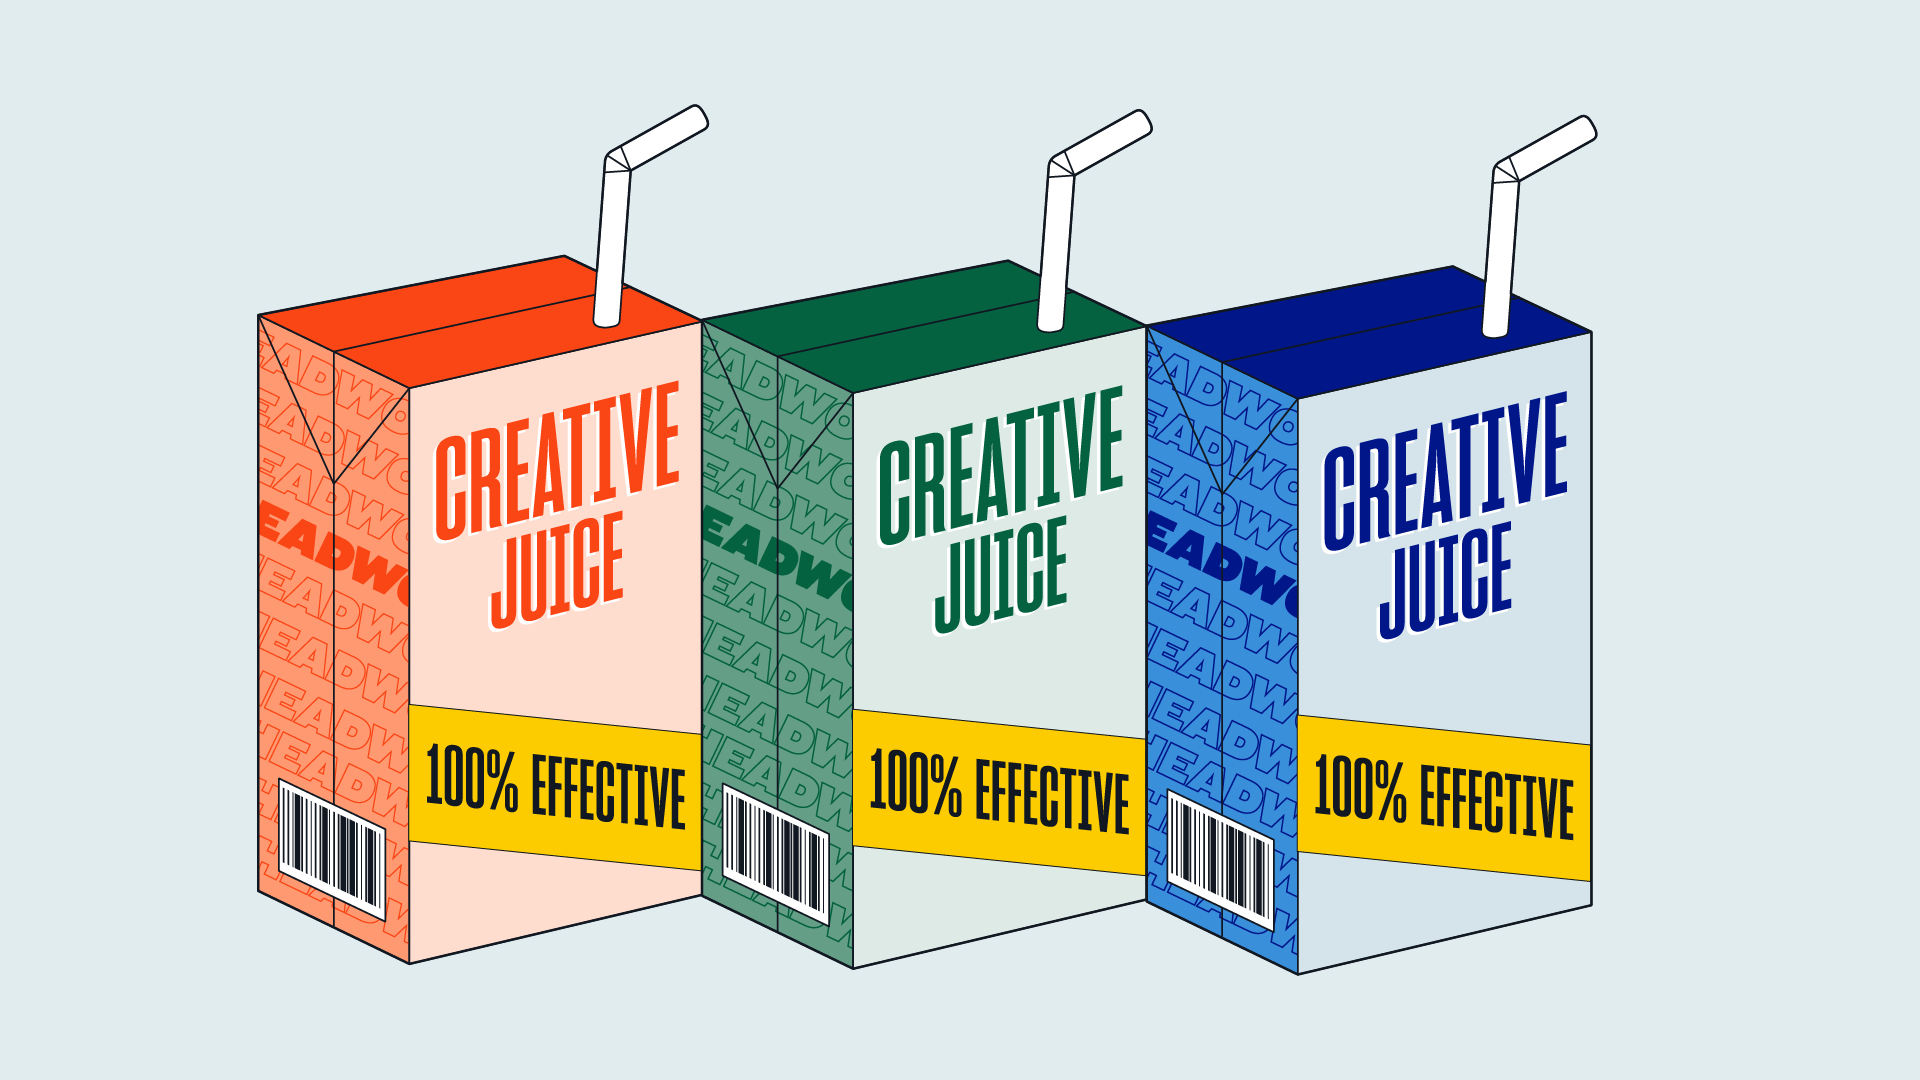 How To Work With Creatives